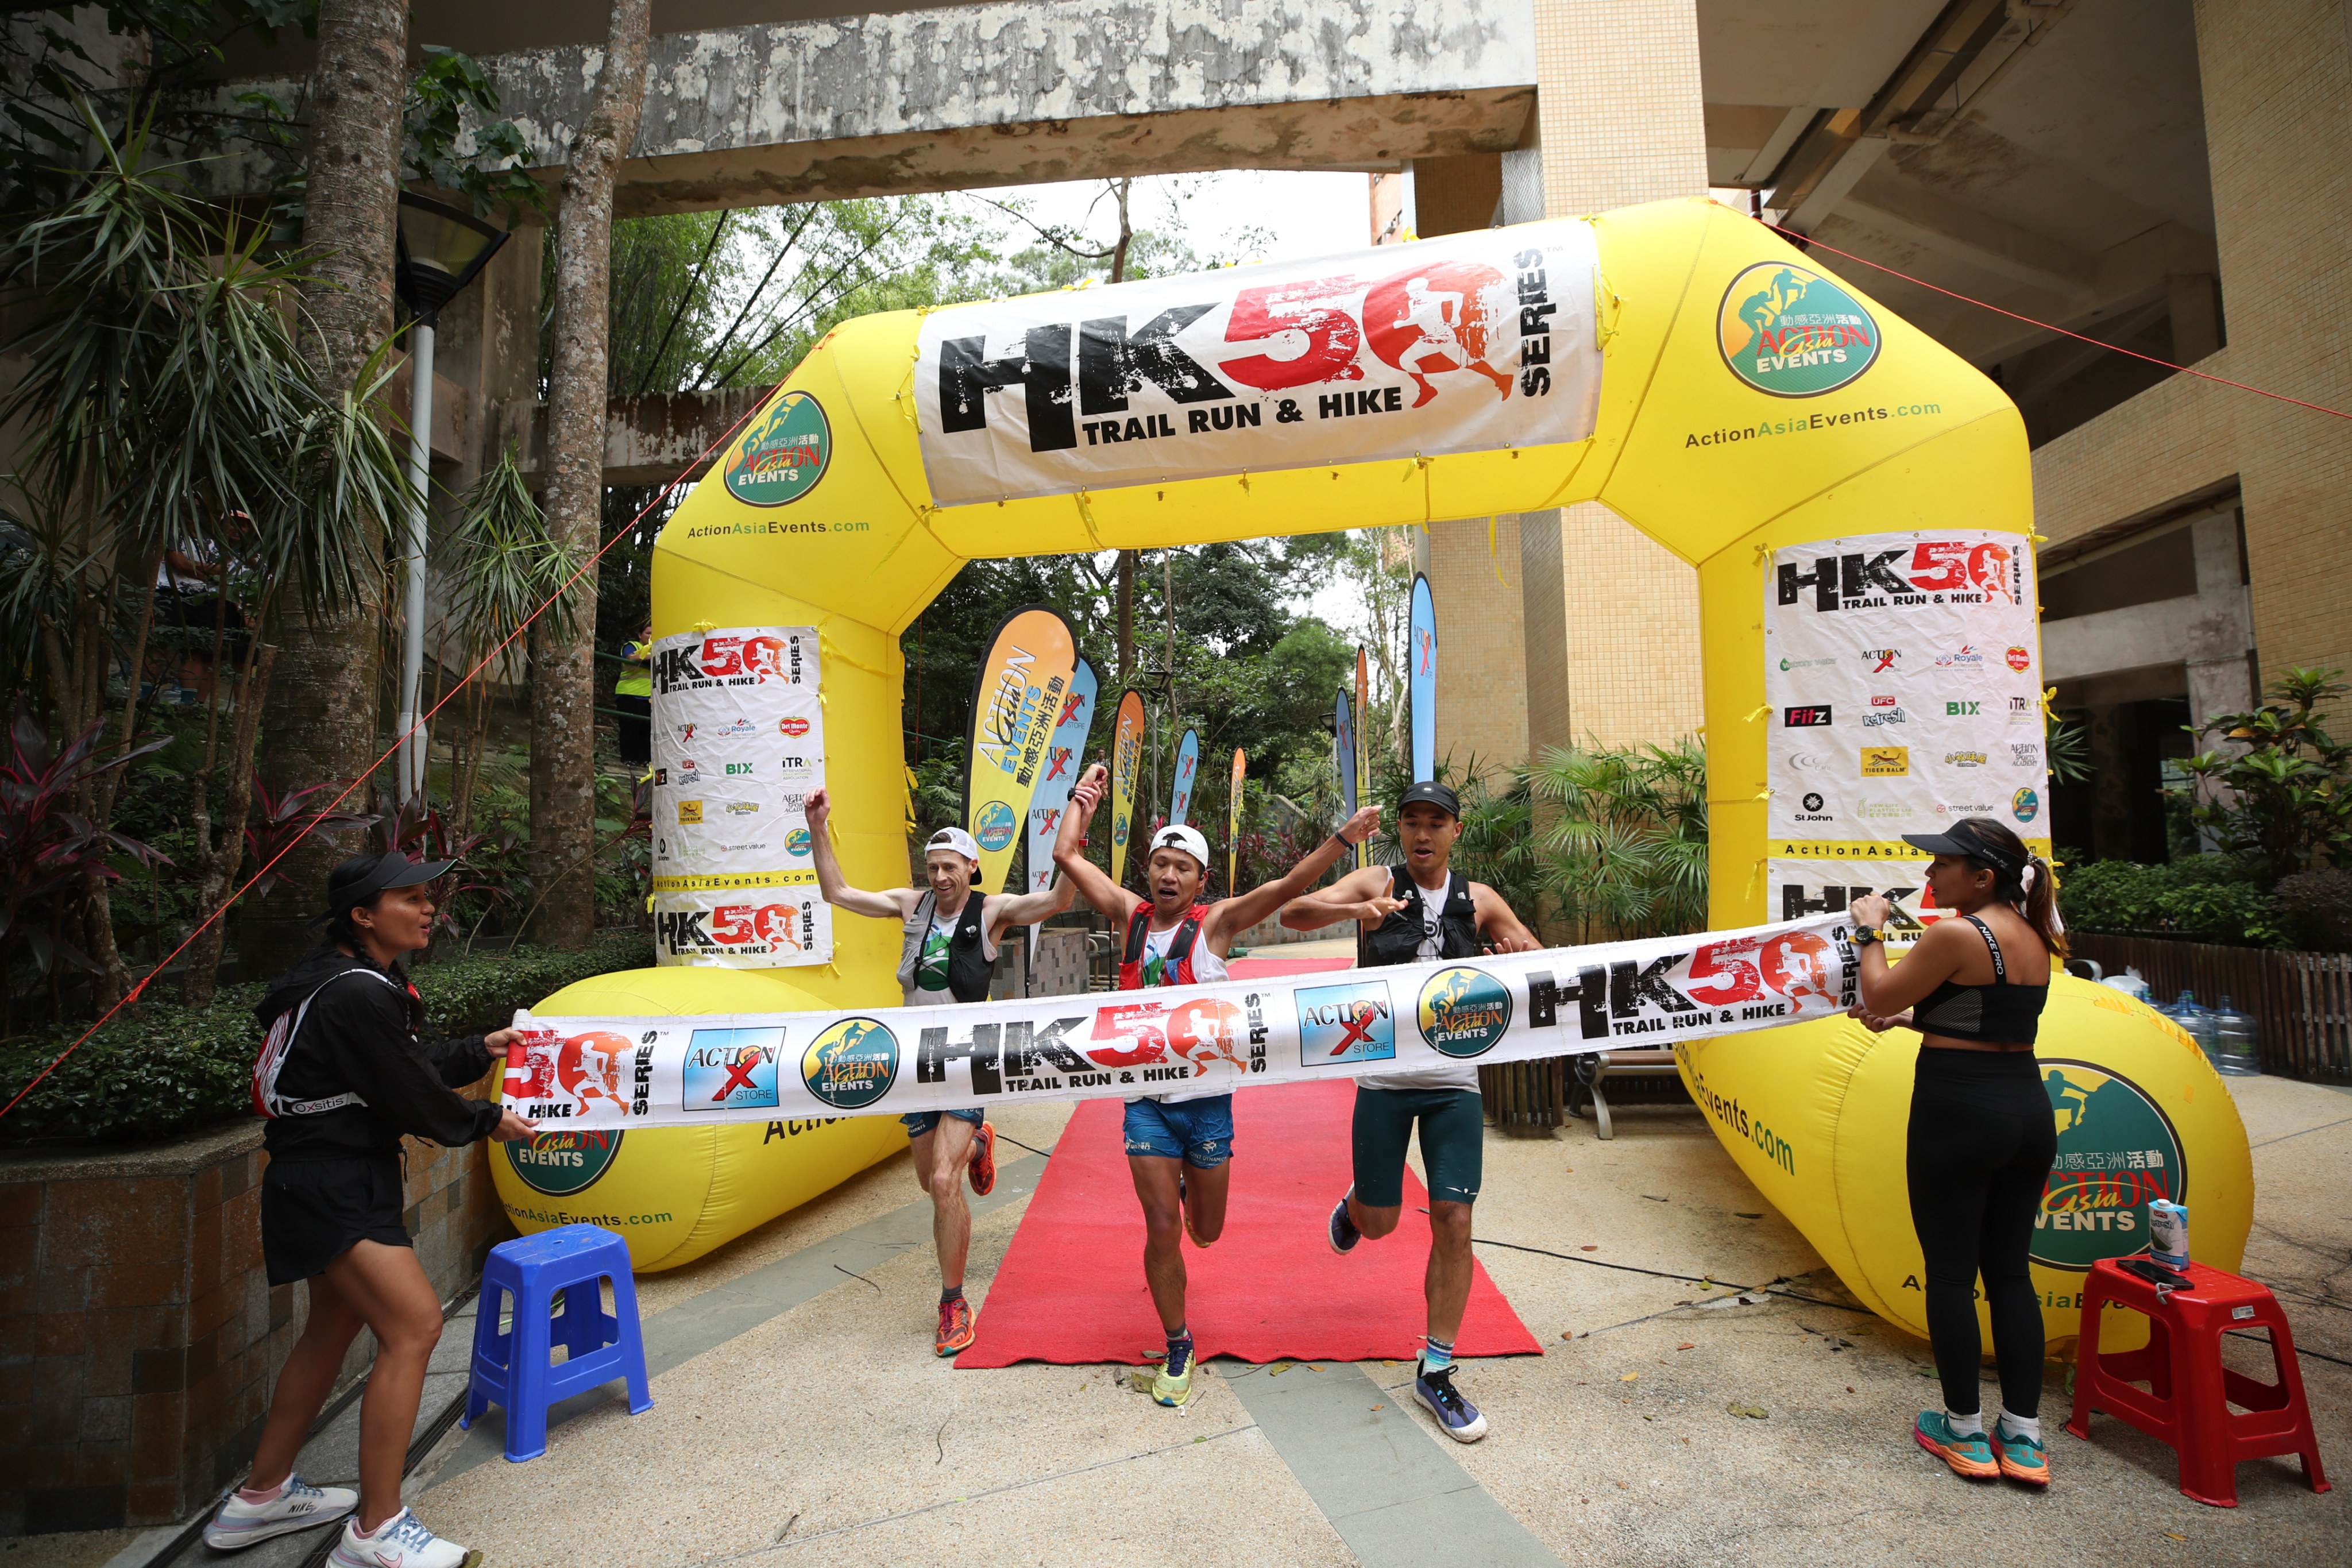 Jeff Campbell, Chan Ka-keung and Wong Wai-hung cross the finish line together to win the men’s race of the HK50 Series event on Hong Kong Island. Photo: Action Asia Events